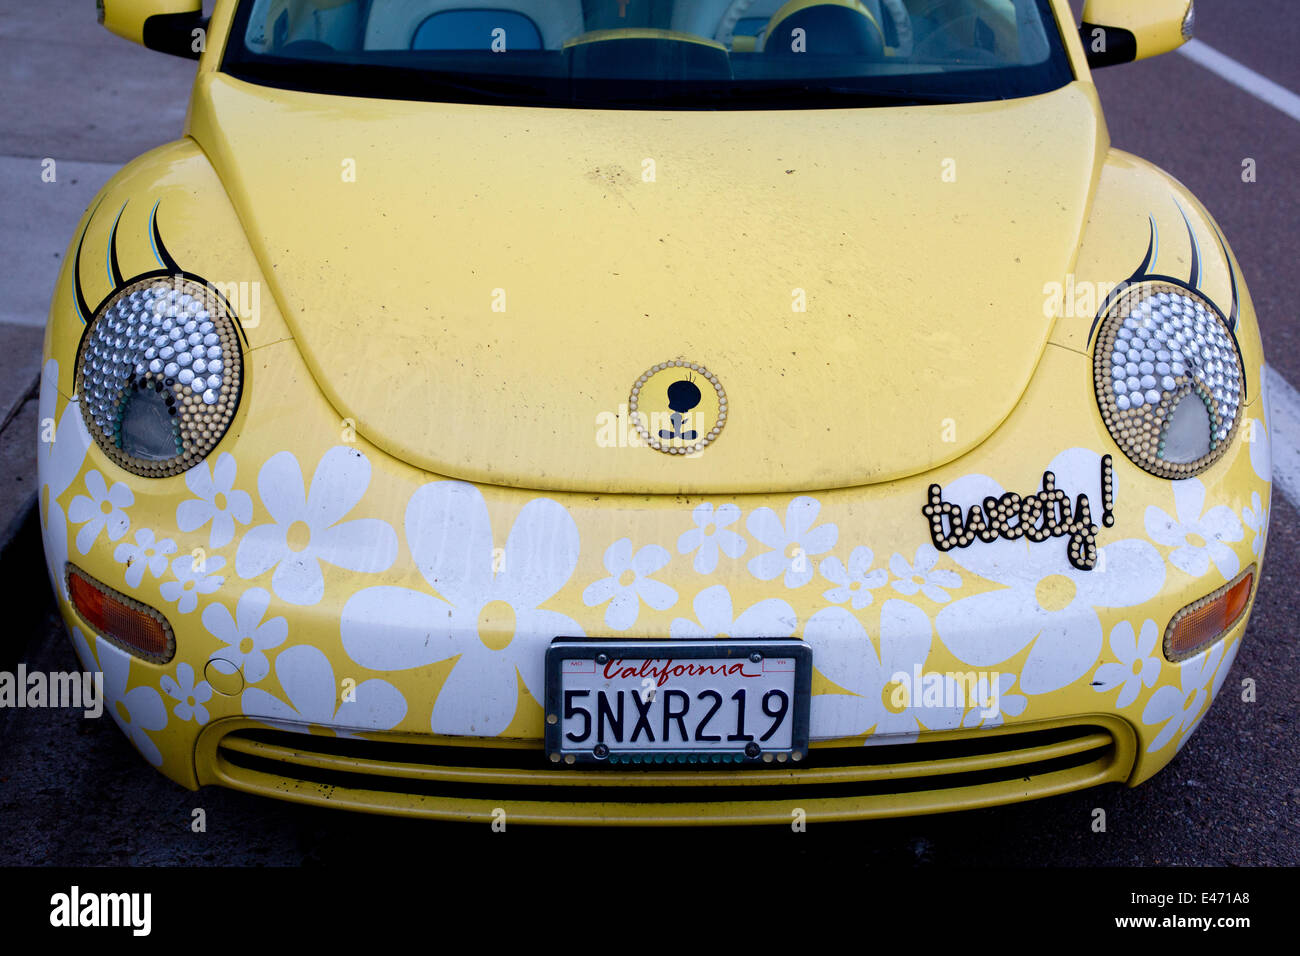 Tweety-Version of a VW Beetle, with flower decoration and headlight-eyes with eyelashes, in June 2014. Stock Photo